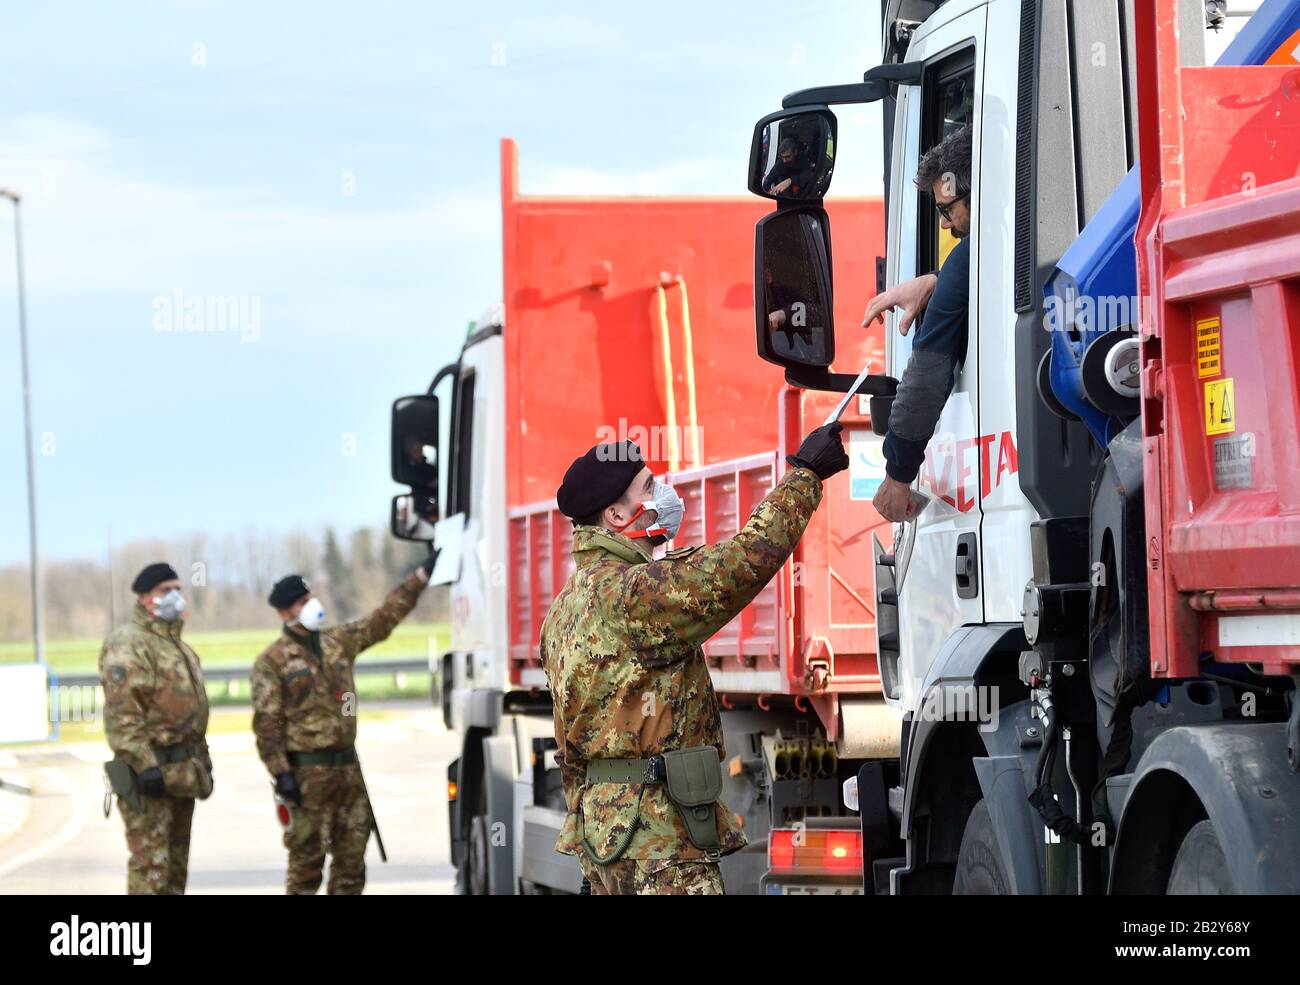 Turano Lodigiano. 4th Mar, 2020. Italian Army soldiers check transit to and from the cordoned areas in Turano Lodigiano, Italy, Feb. 27, 2020. Italian authorities on Tuesday confirmed 2,263 coronavirus cases, which marked an increase of 428 infections compared to the previous day. The figure did not include recoveries or fatalities, whose numbers were provided separately. Credit: Xinhua/Alamy Live News Stock Photo